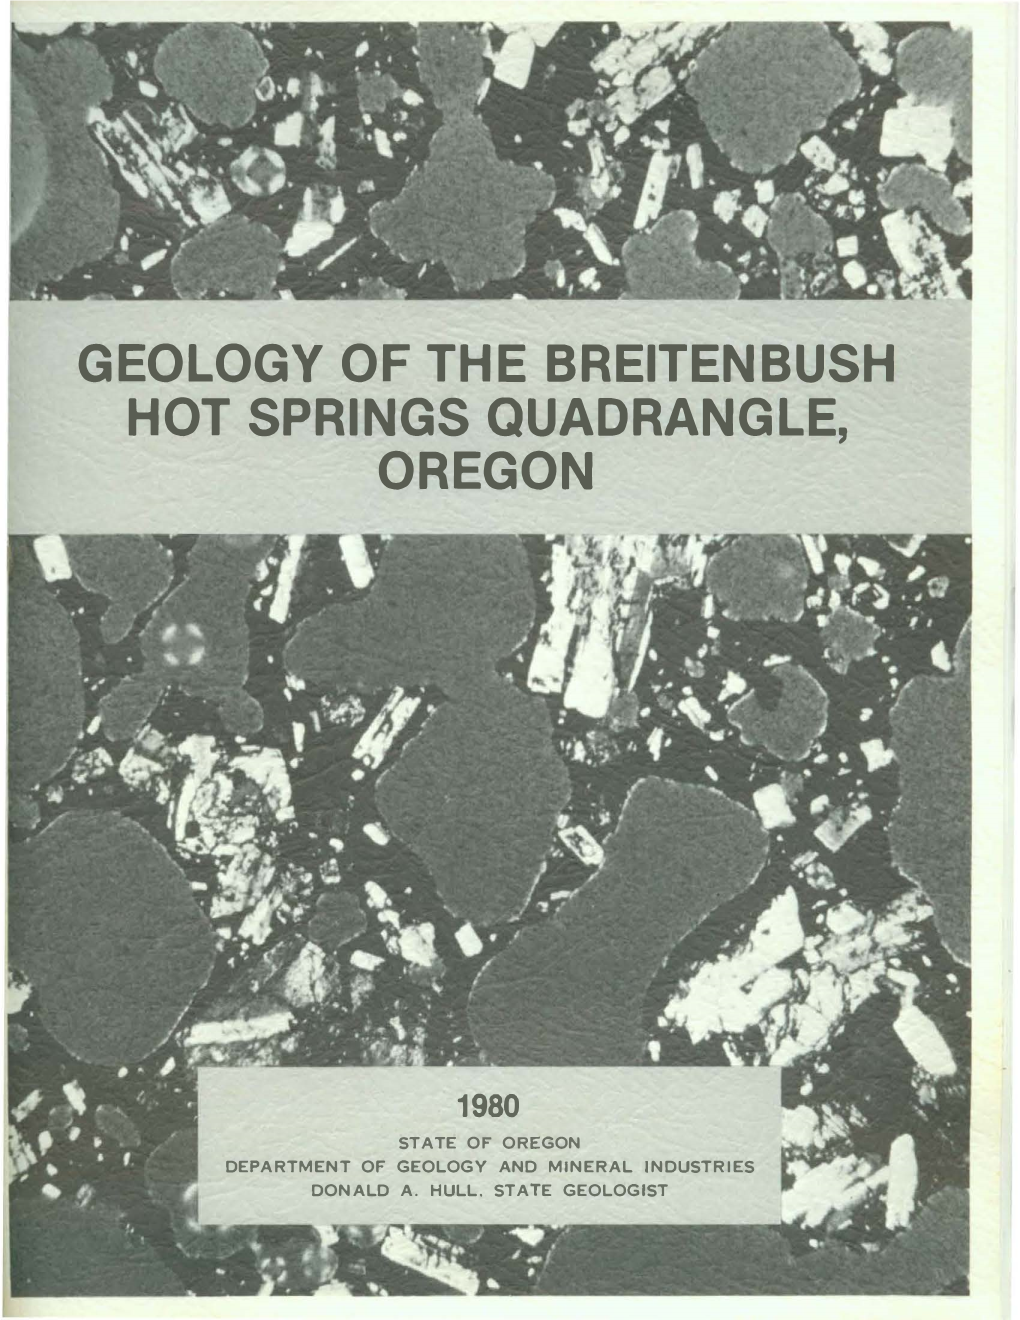 DOGAMI Special Paper 9, Geology of the Breitenbush Hot Springs